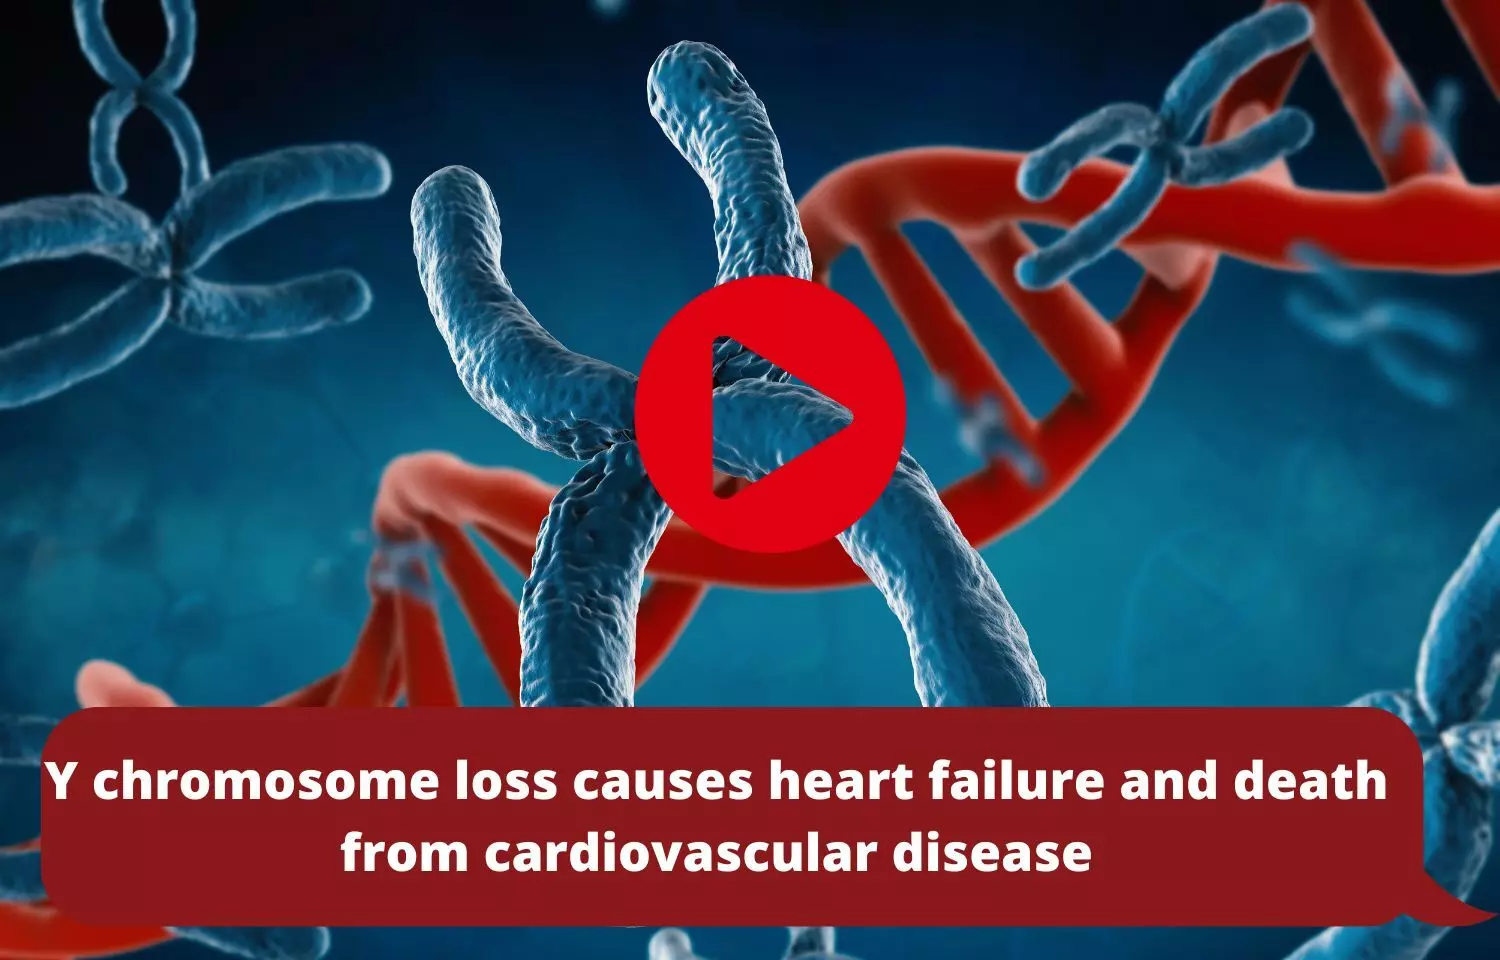 Y chromosome loss causes heart failure and death from cardiovascular disease